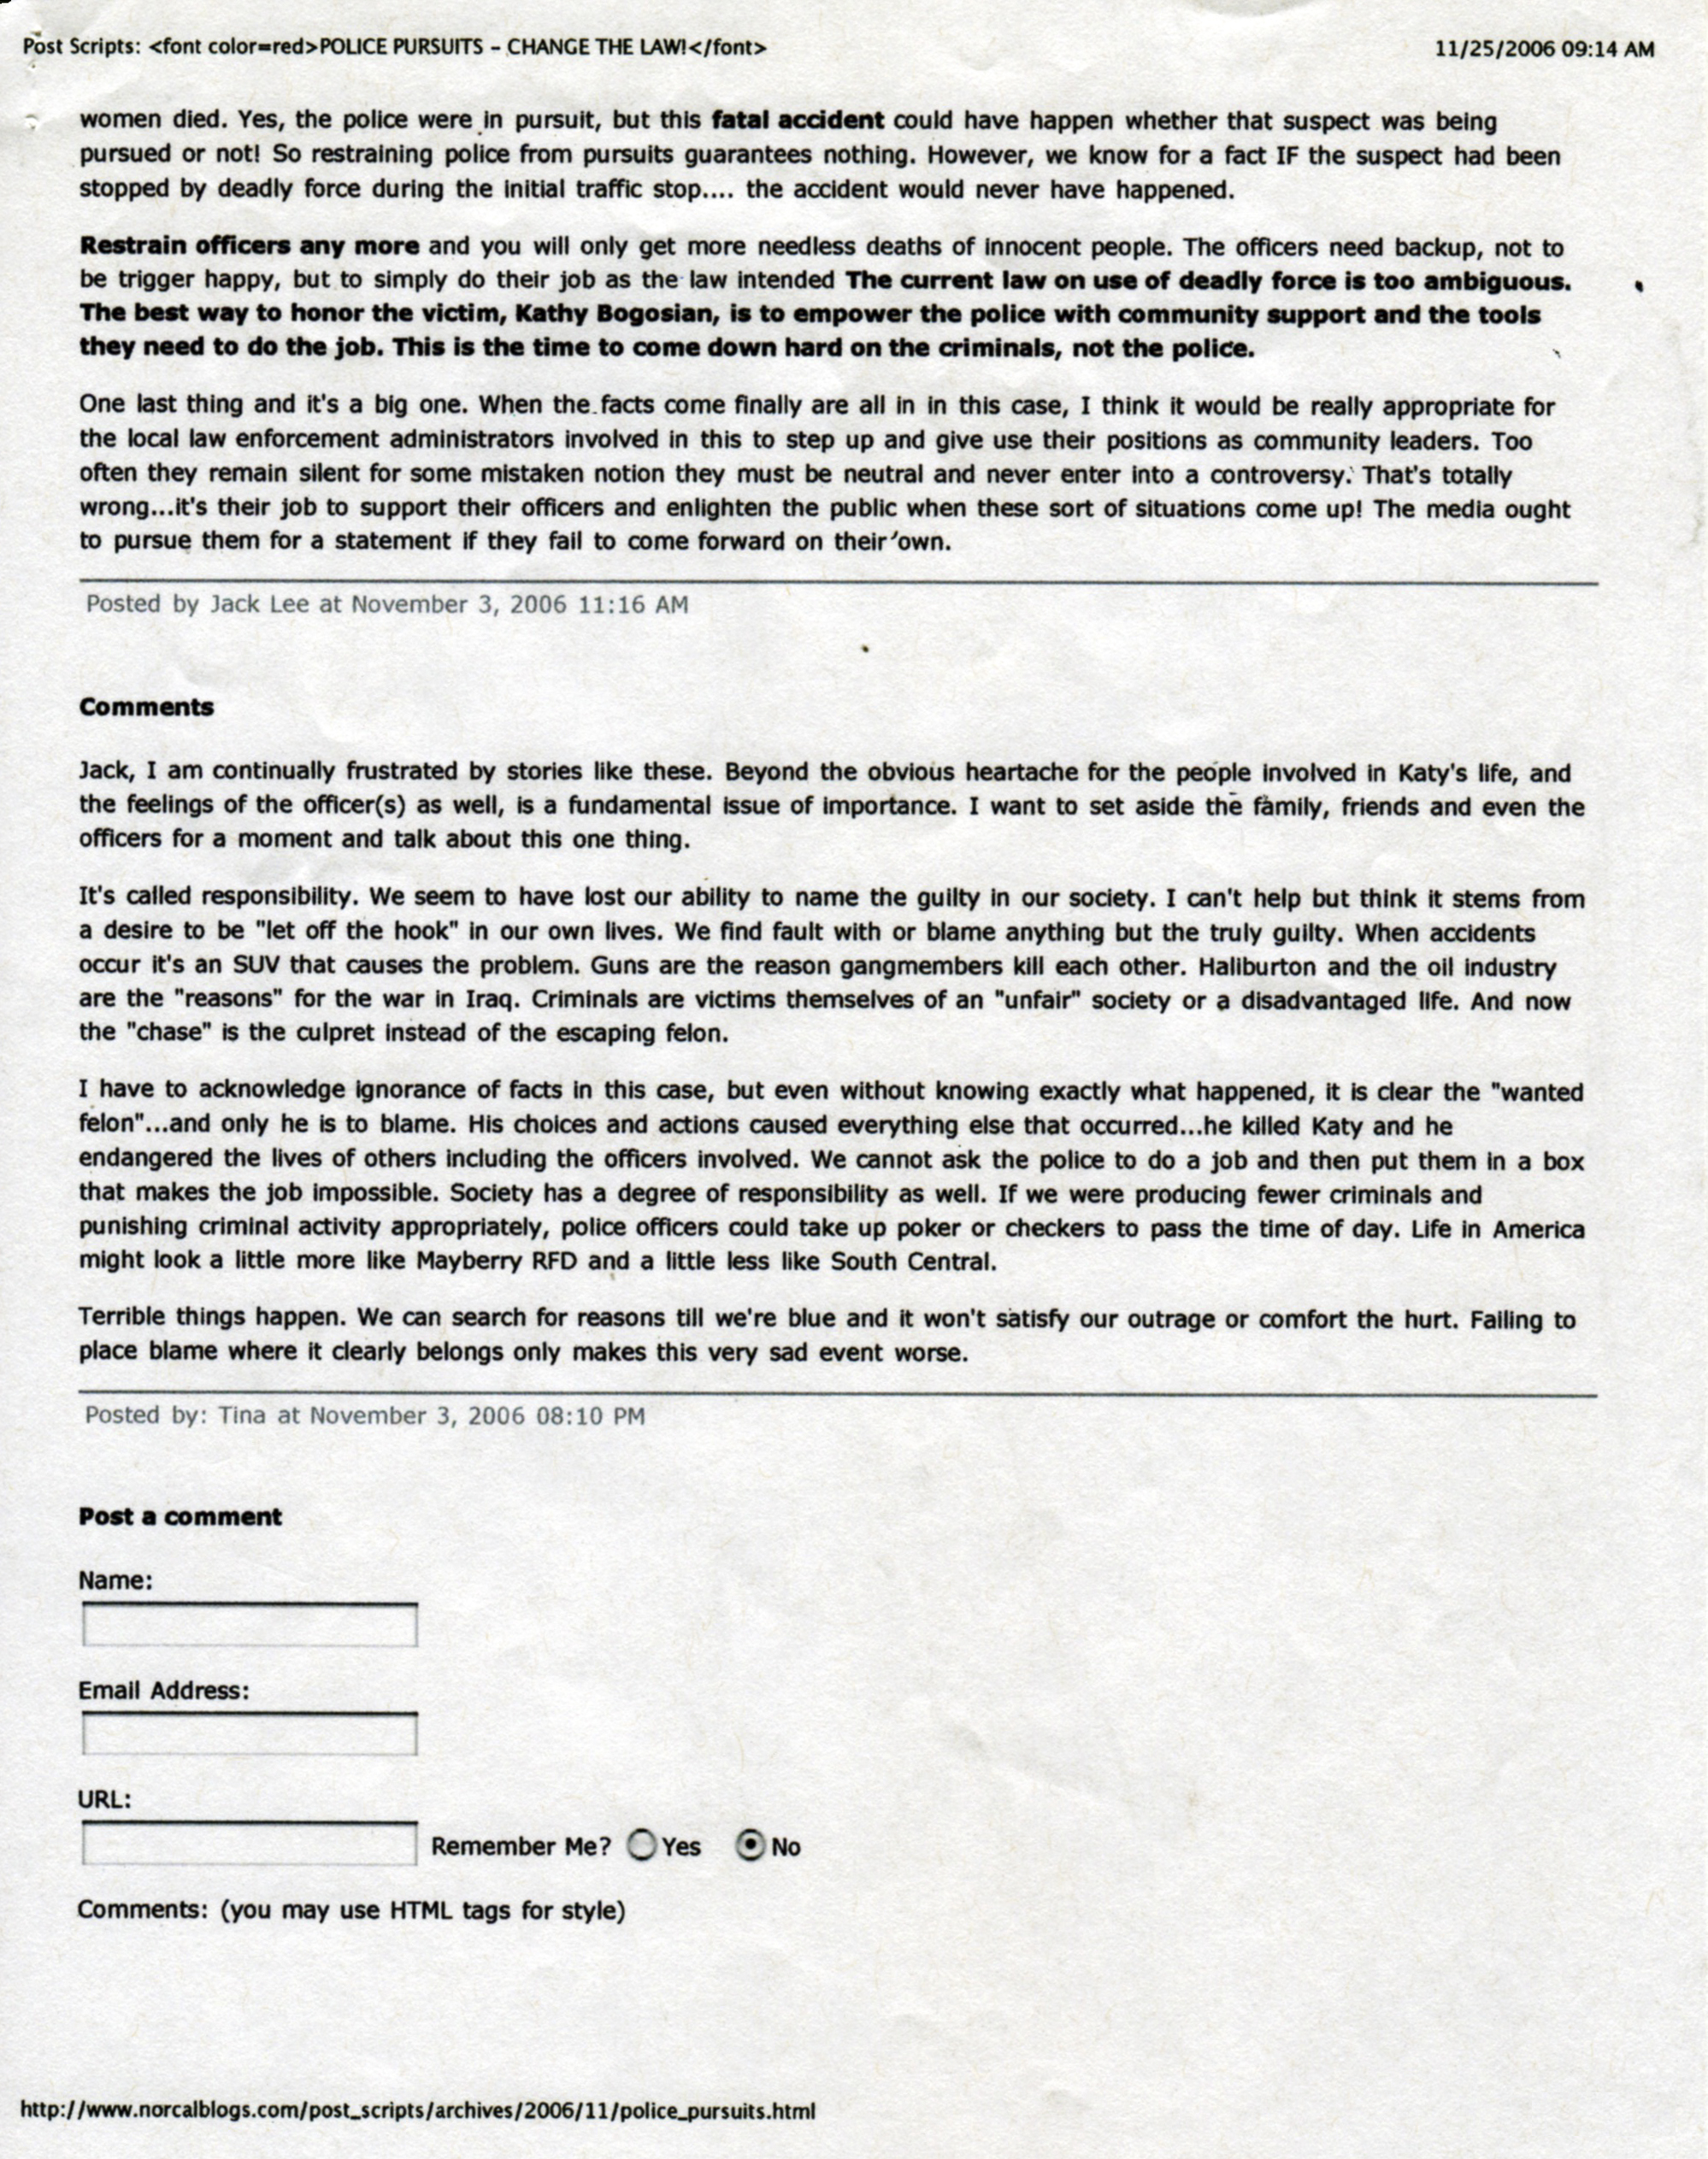 Bogosian_Change the Law, page 2